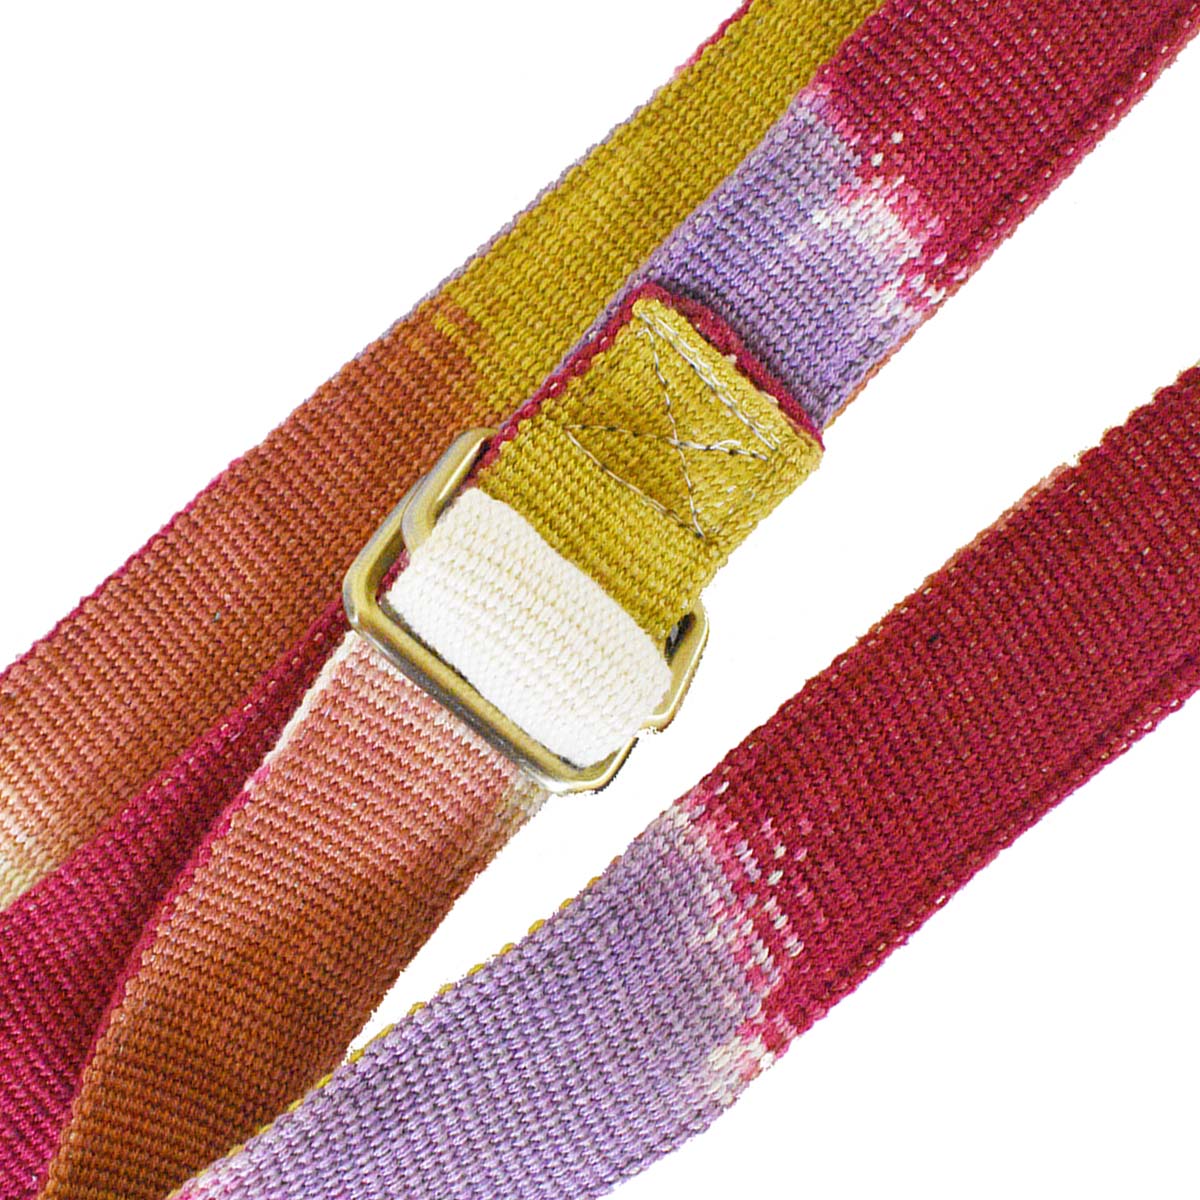 A zoomed-in detail of the Celeste Belt in Raspberry Paleta pattern, with a focus on the buckle. It has a flame stitch red, purple, yellow ochre, and white pattern.